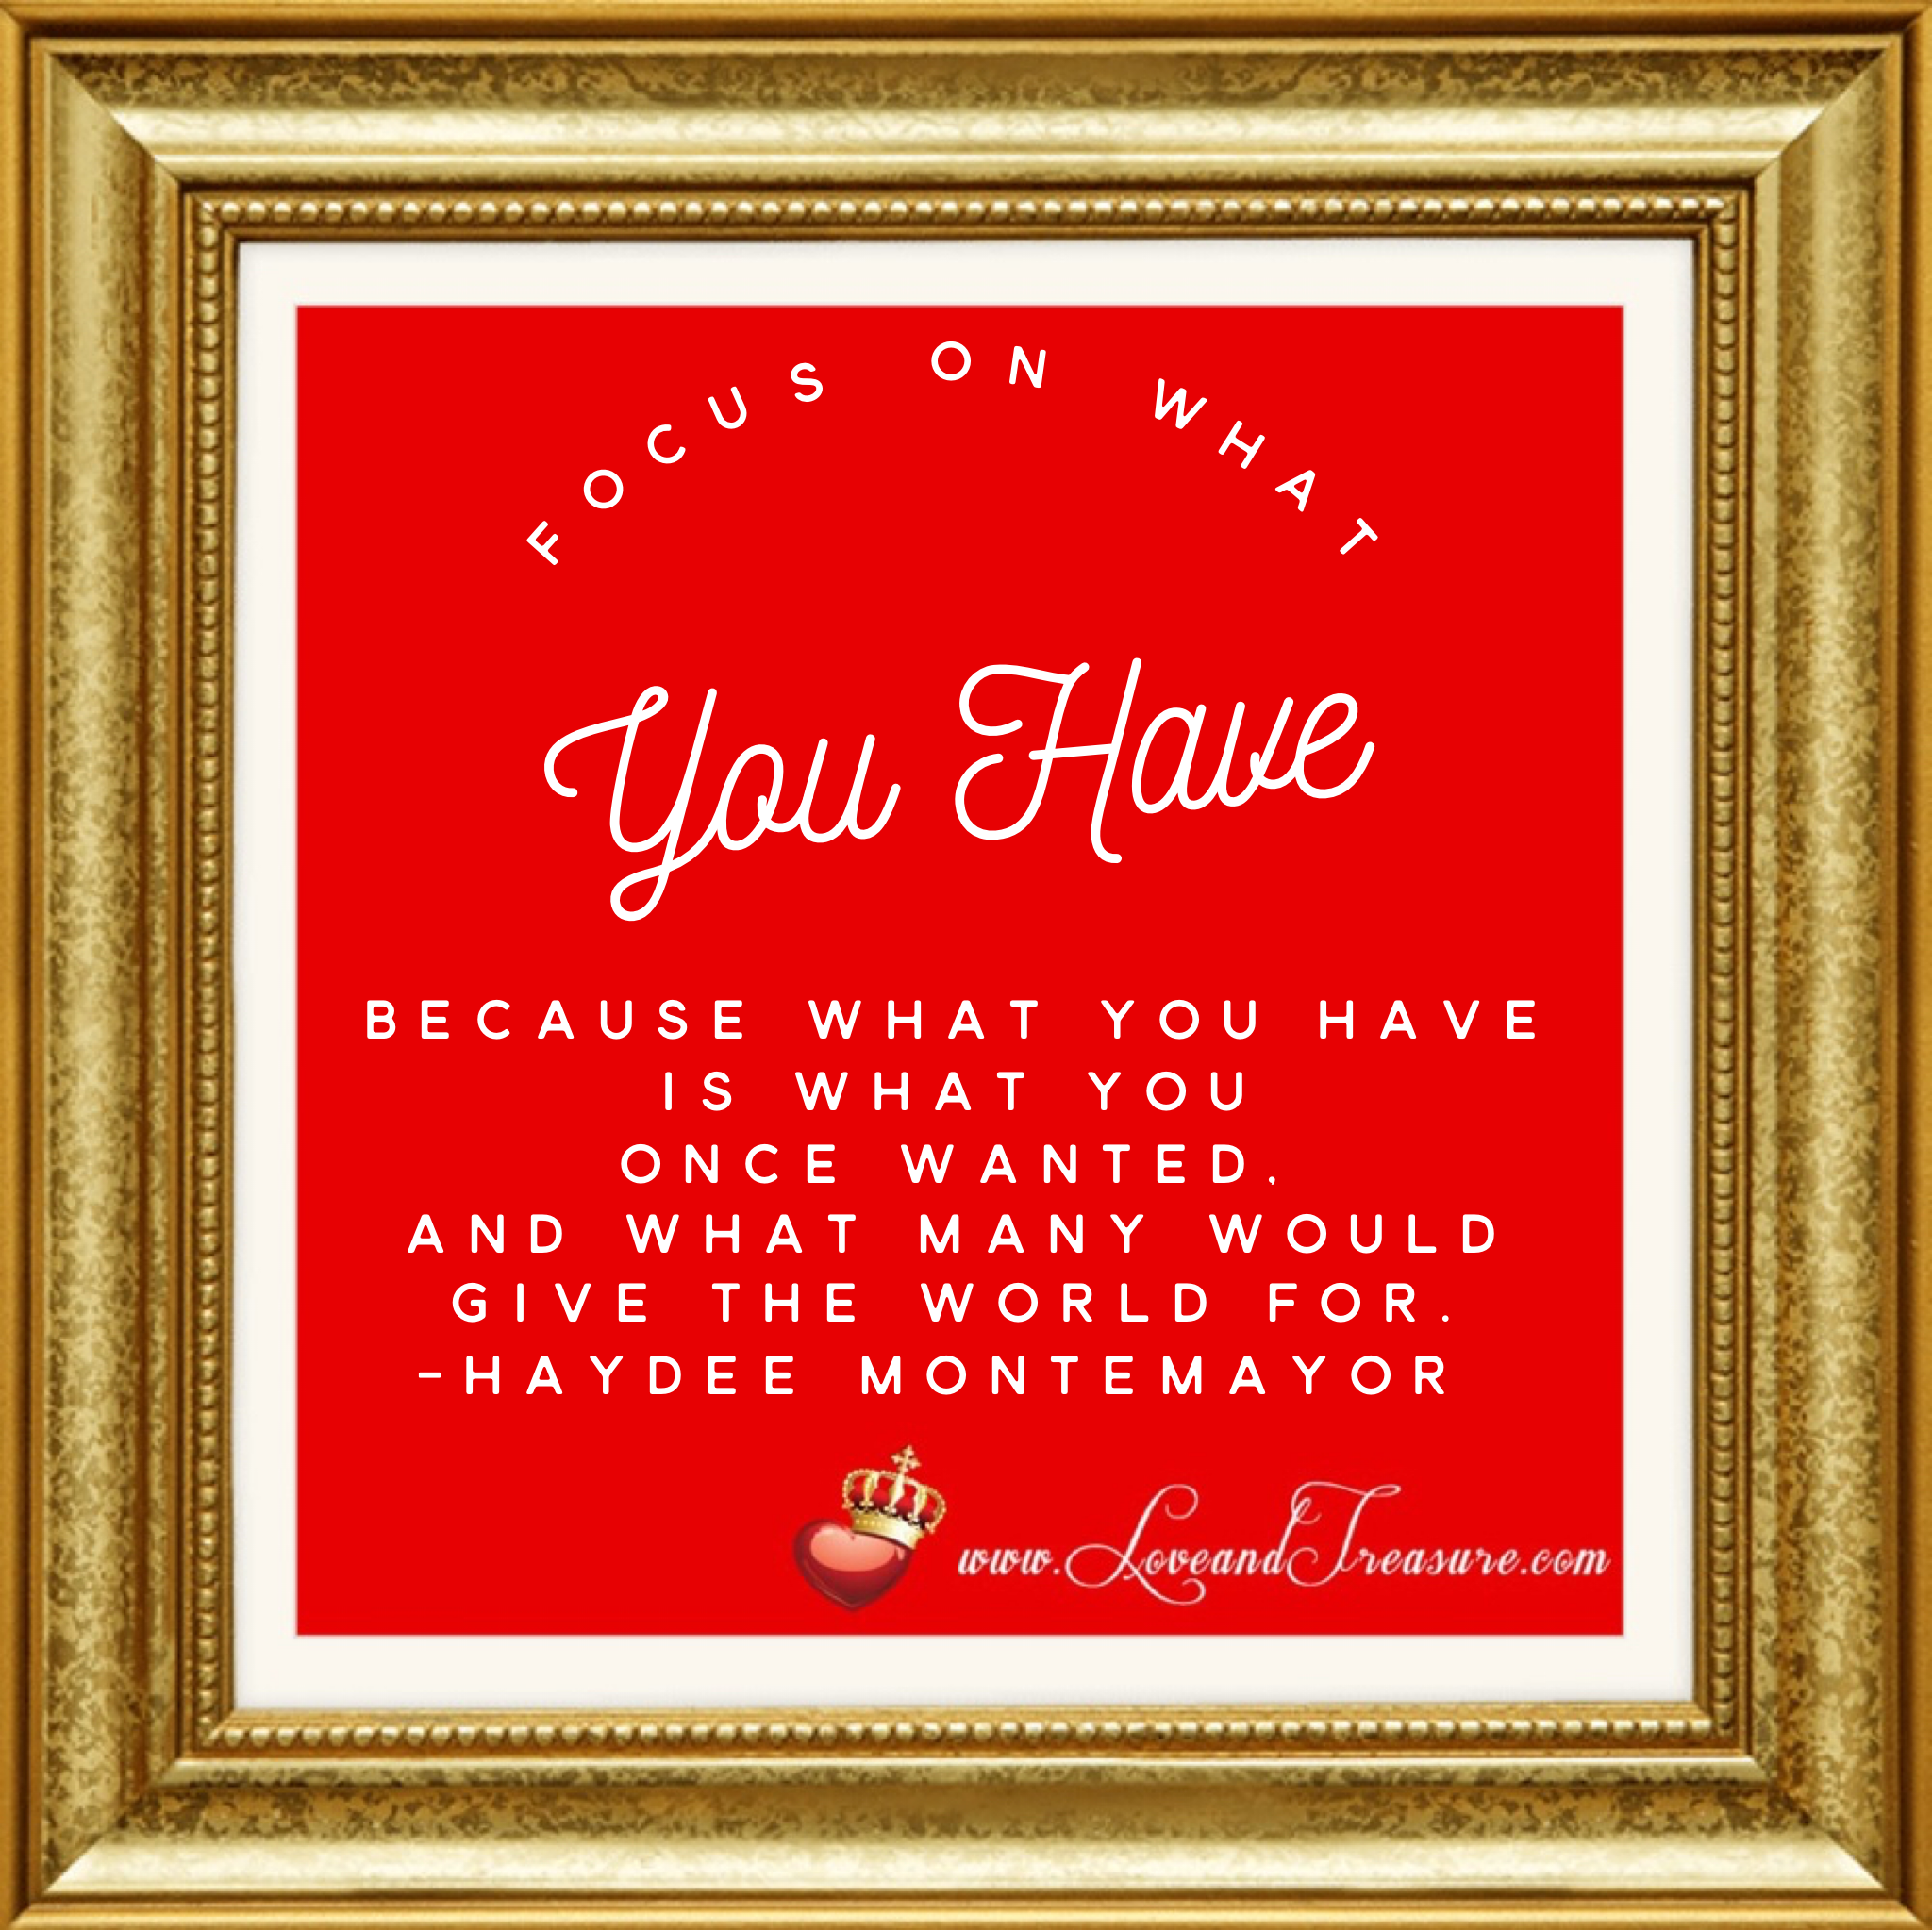 Focus on what you have because what you have is what you once wanted and what many would give the world for. Quotation by Haydee Montemayor from Love and Treasure blog at www.loveandtreasure.com